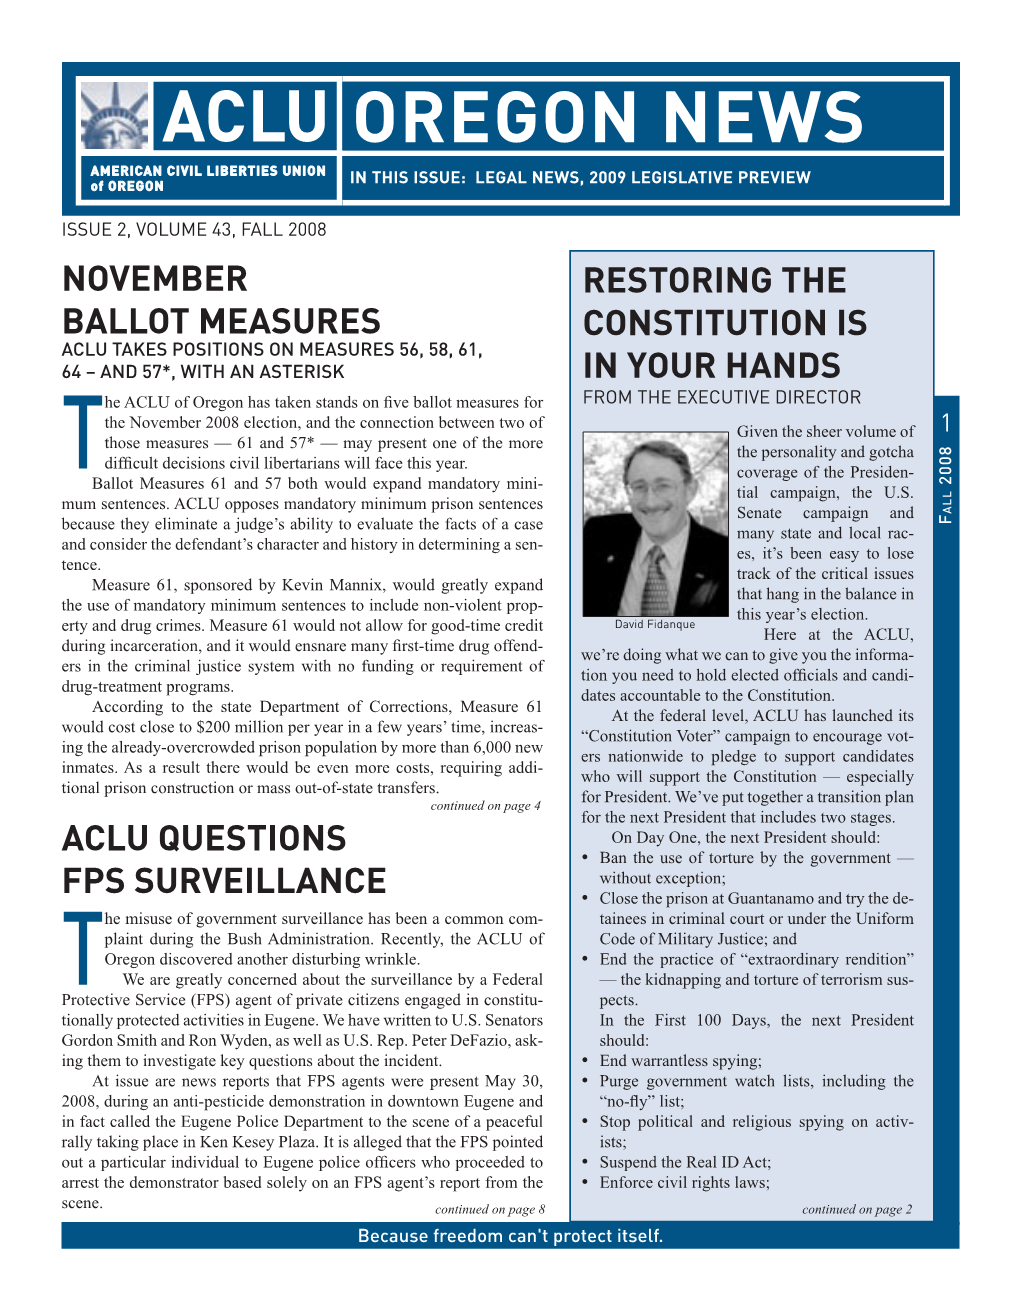 OREGON NEWS in This Issue: Legal News, 2009 Legislative Preview